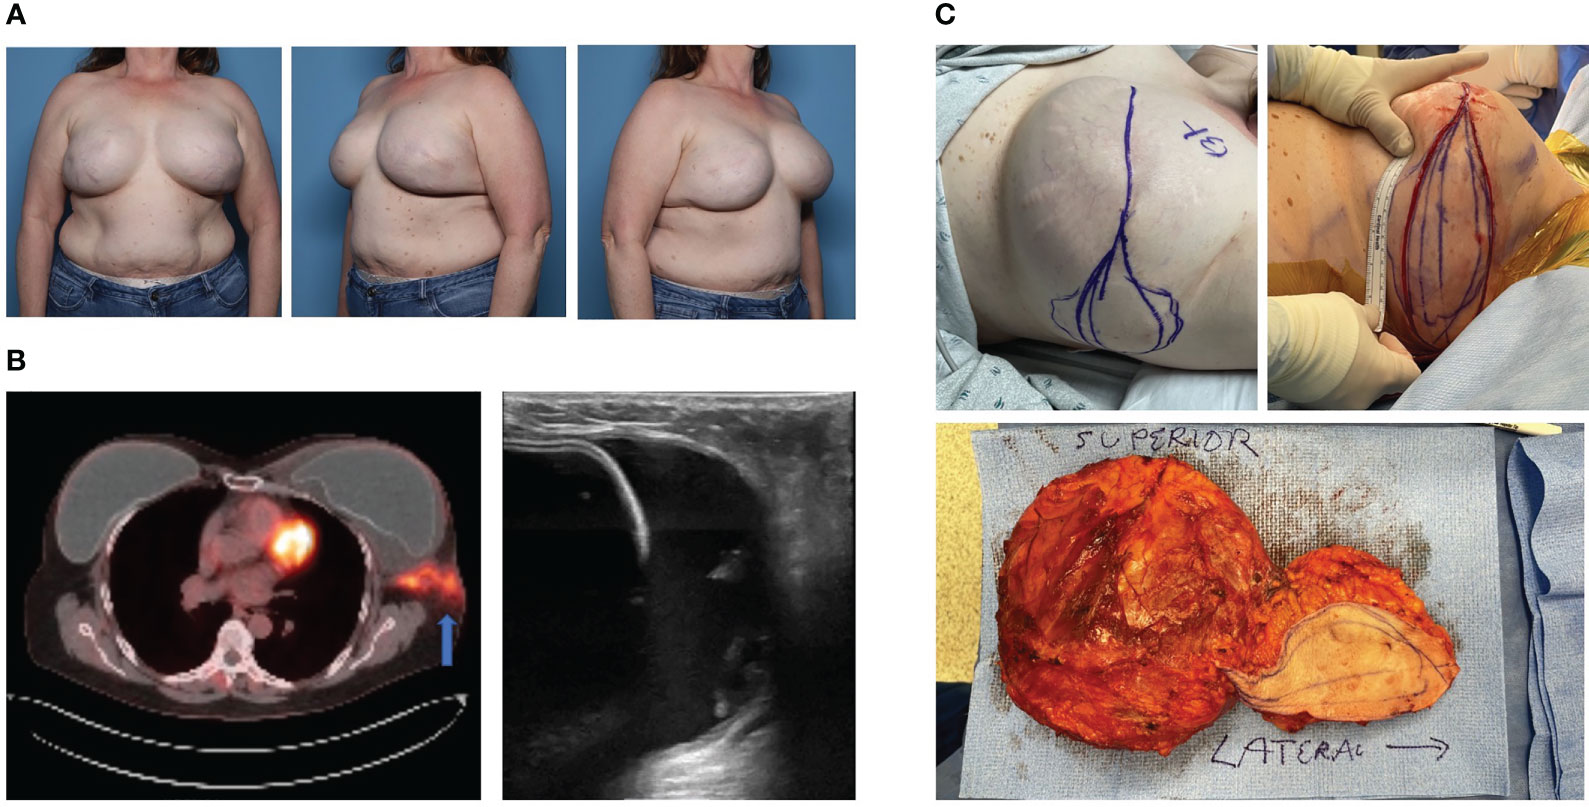 A) Clinical presentation of breast enlargement with periimplant